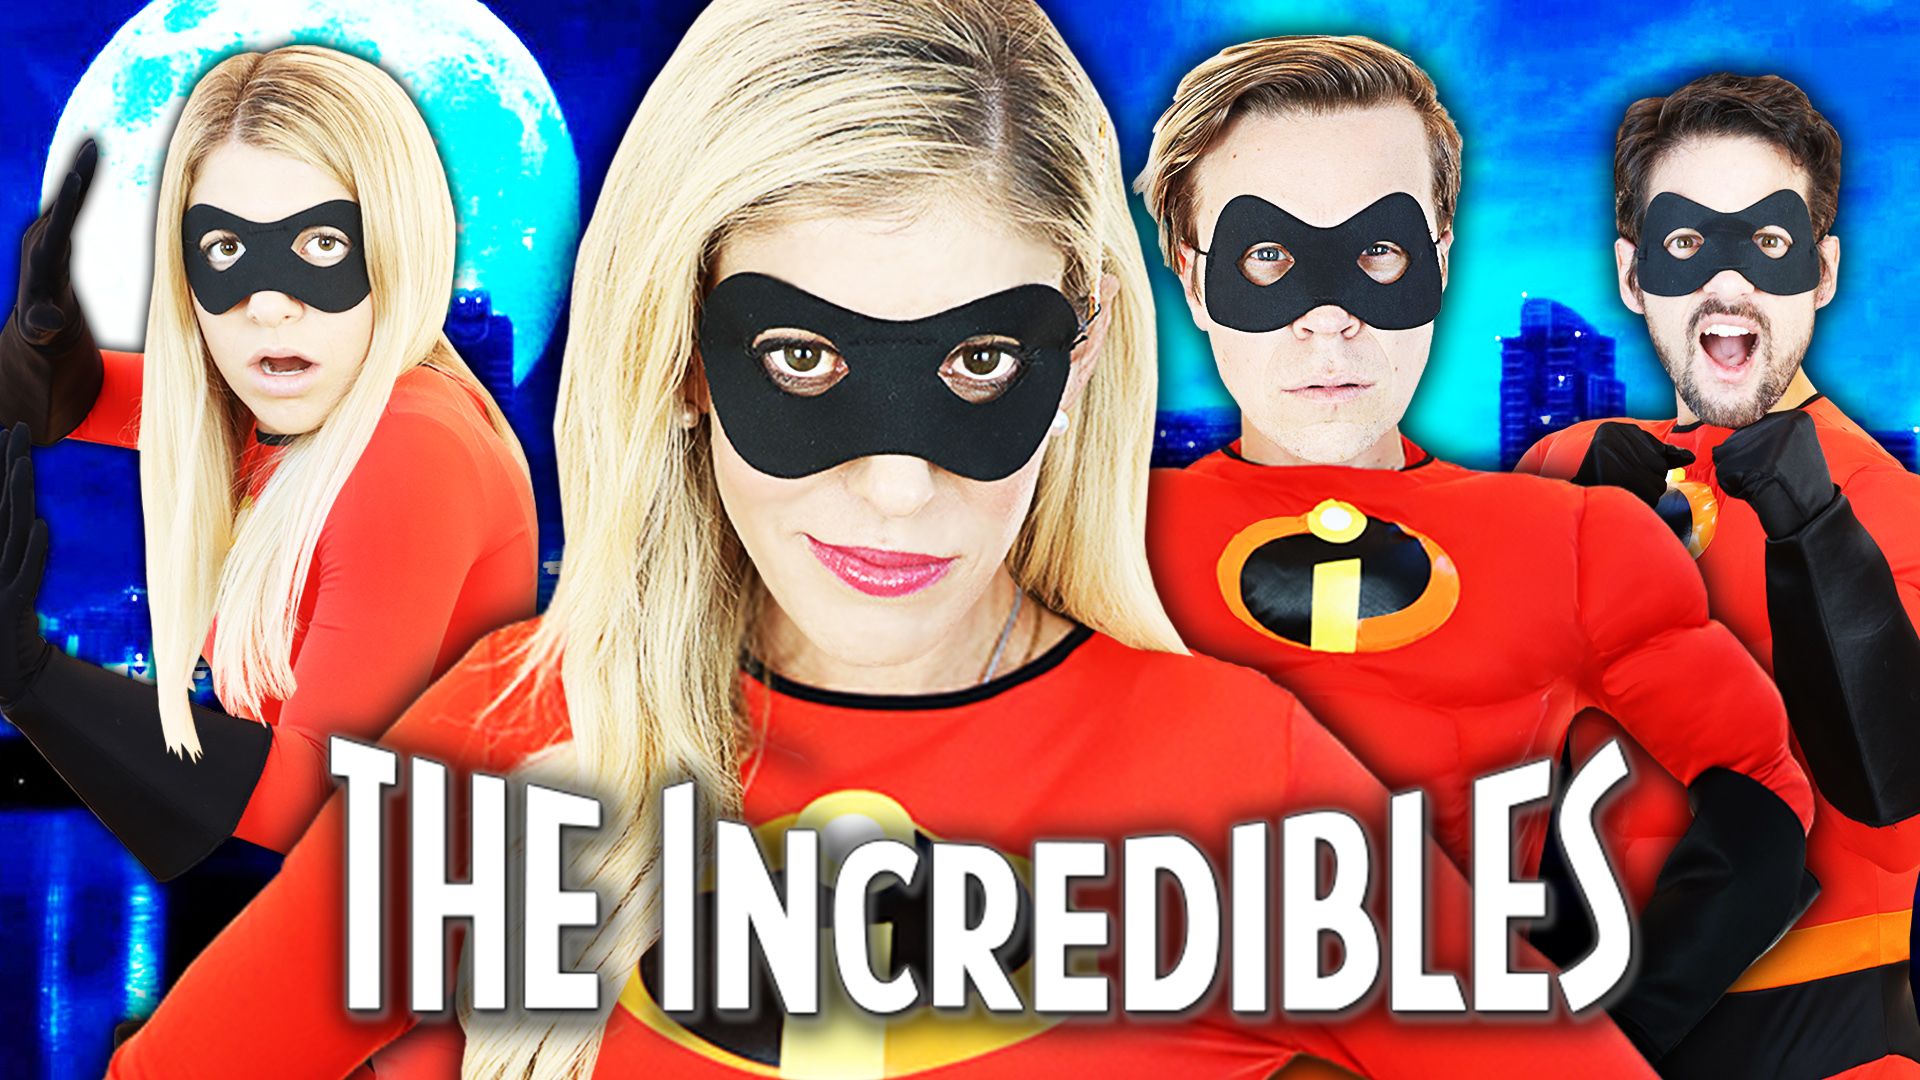 Super Human Powers are possible in real life at Rebecca Zamolo's New House!